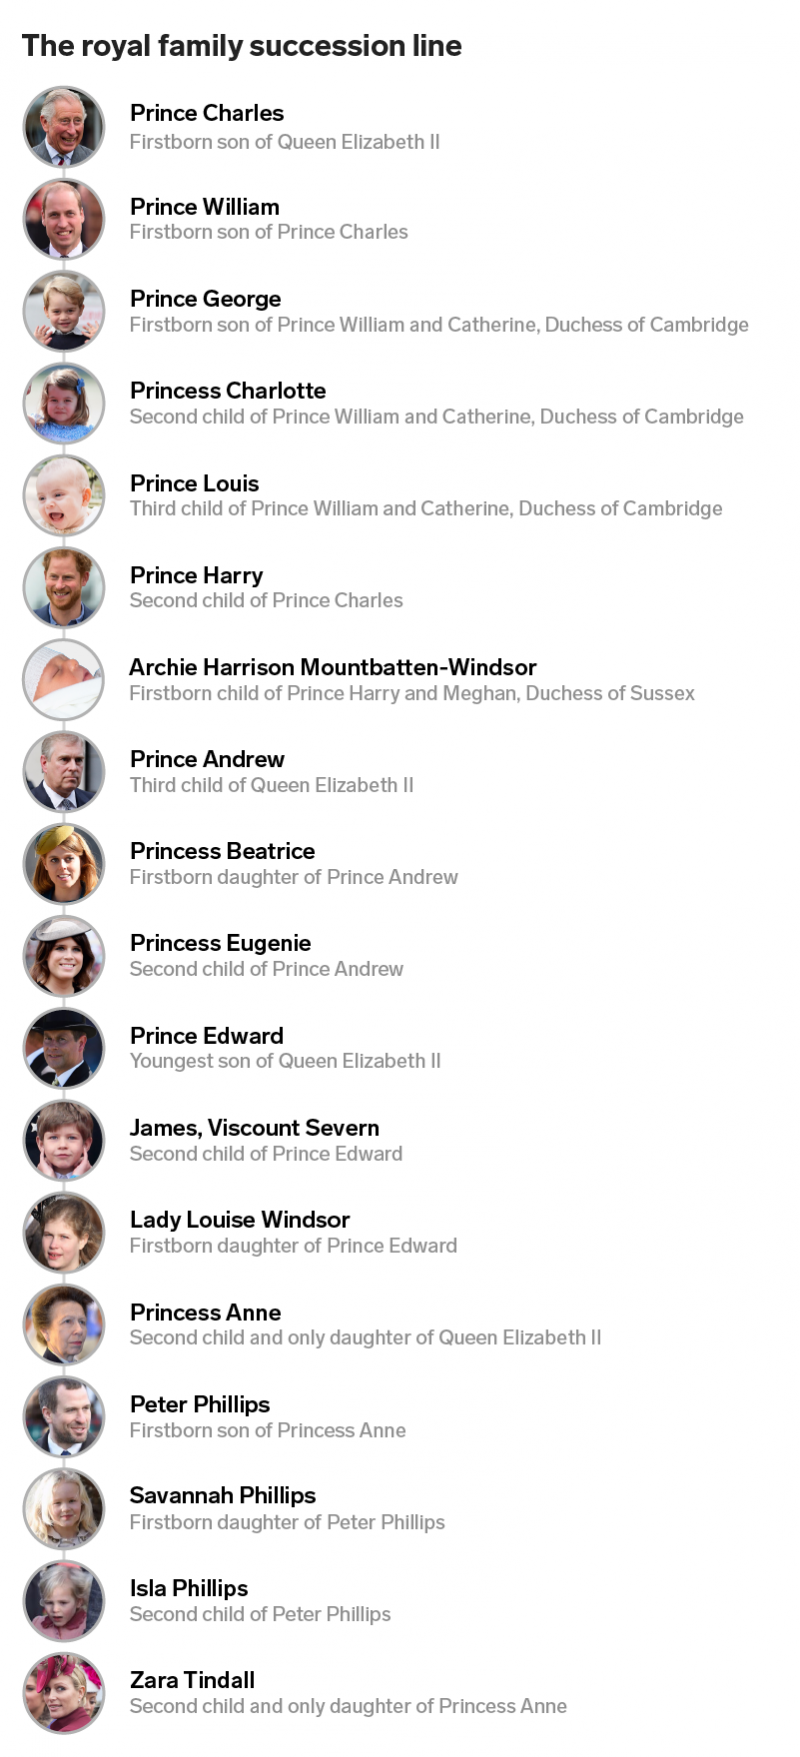 royal family succession line